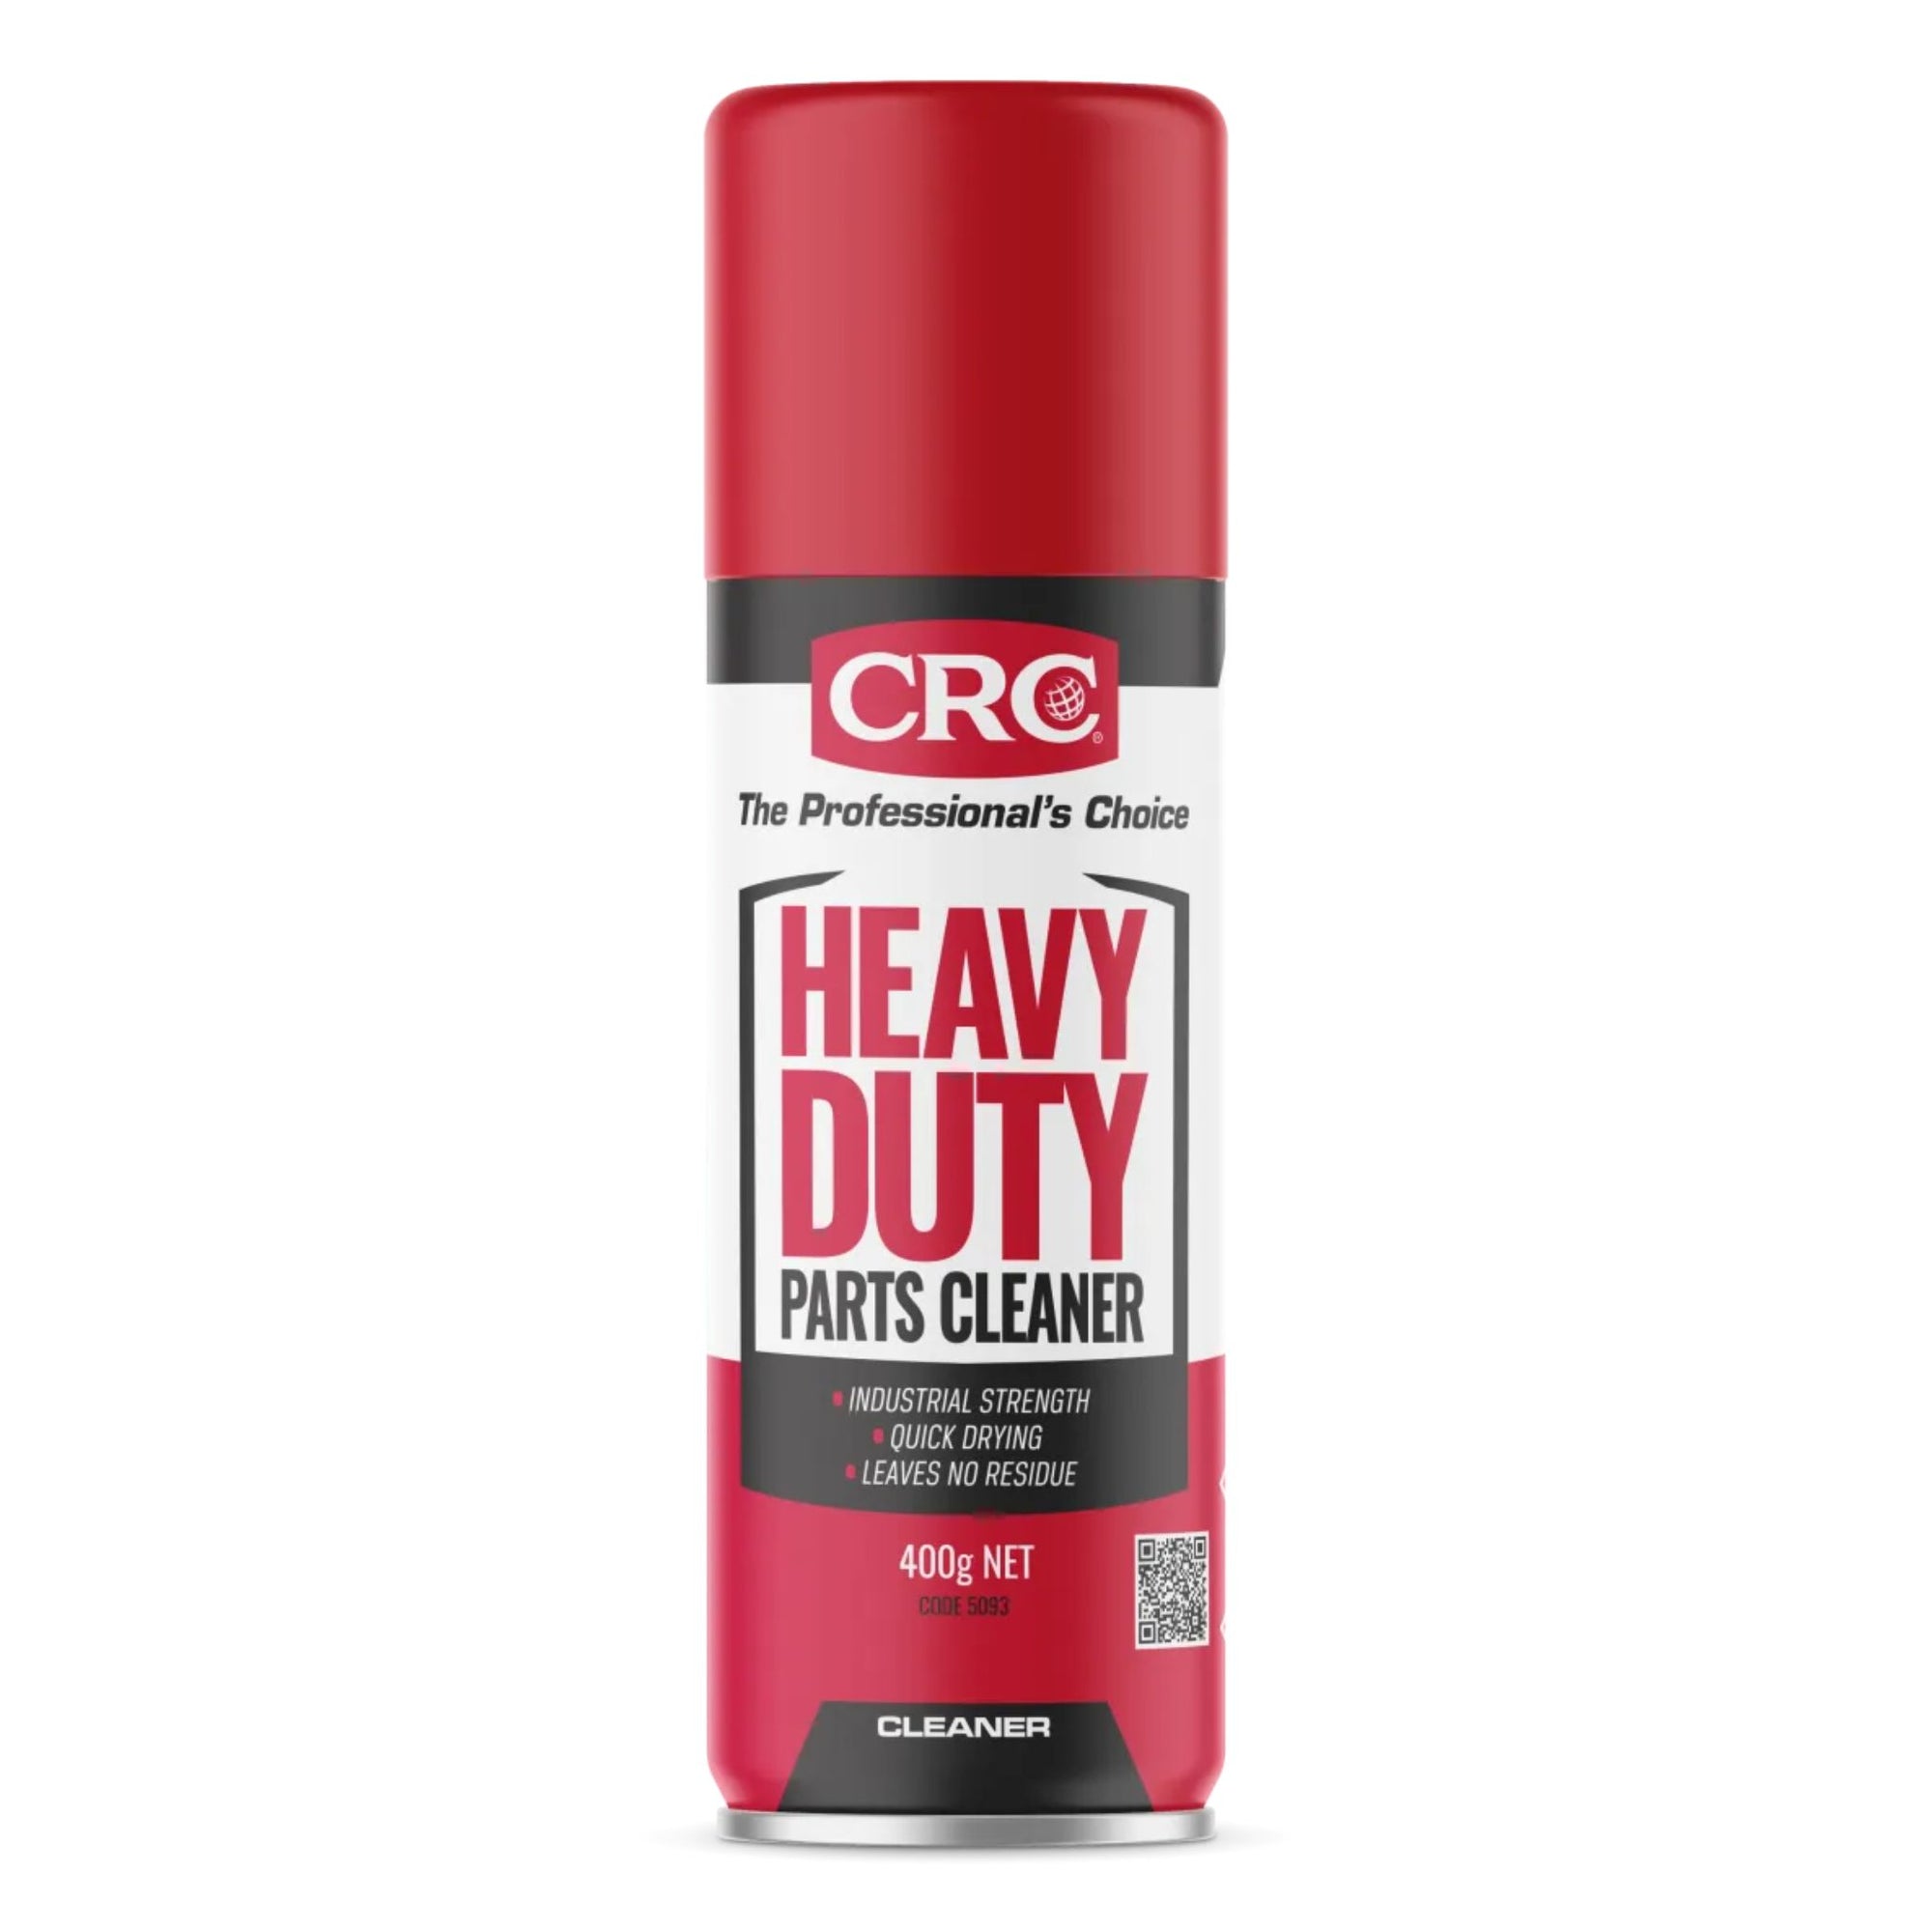 CRC Heavy Duty Parts Cleaner 400g | Product Code : 5093 - South East Clearance Centre